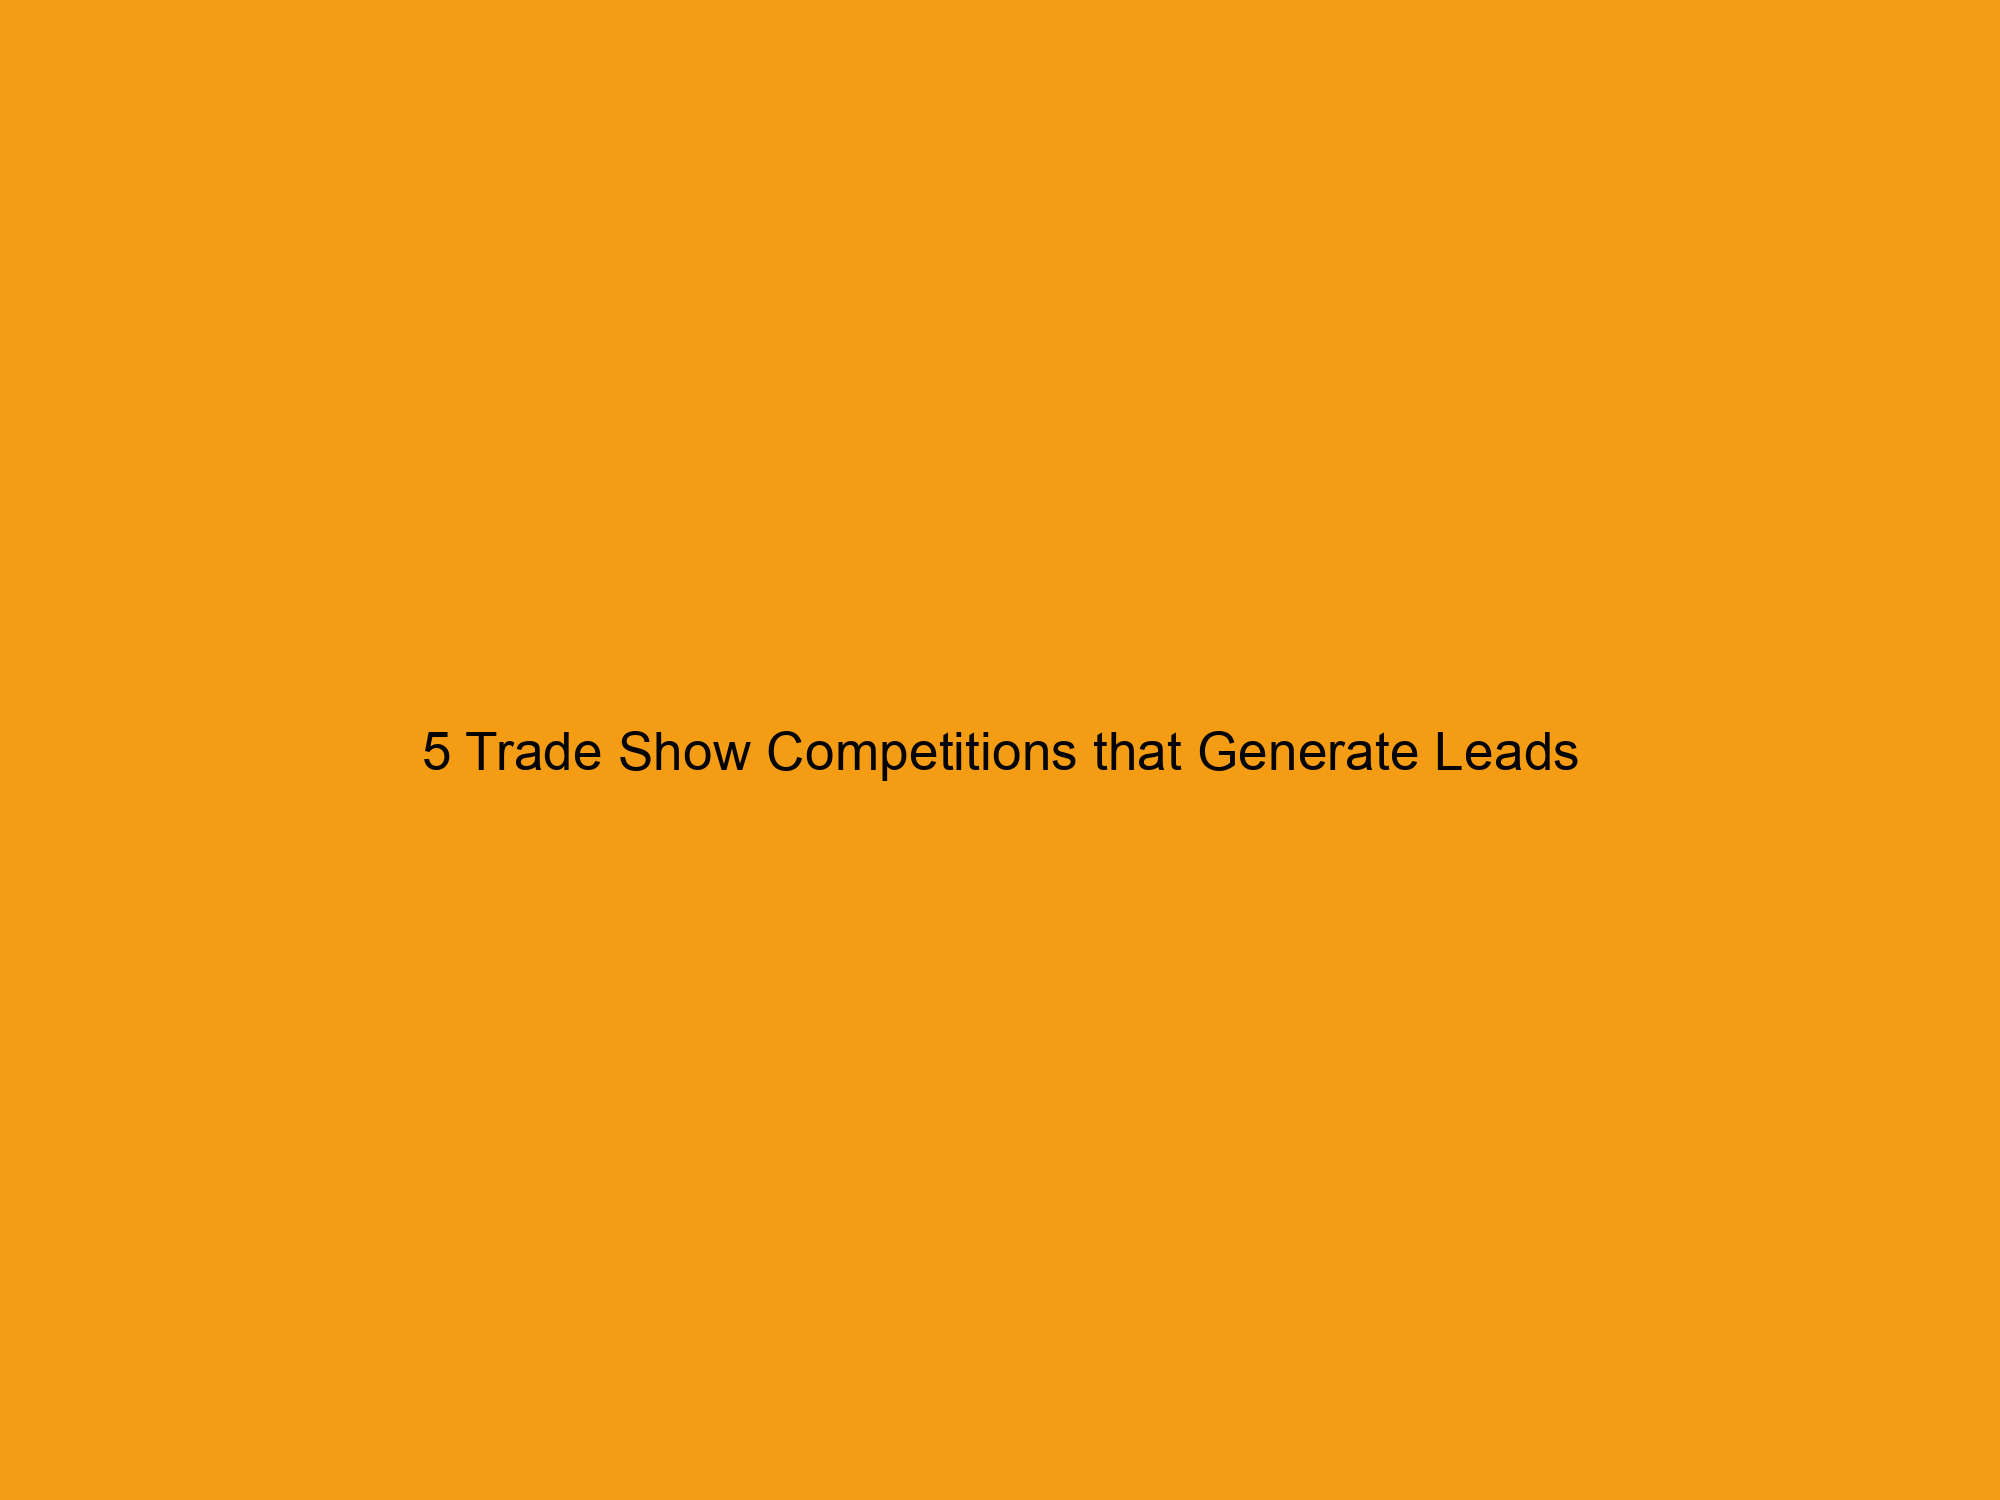 5 Trade Show Competitions that Generate Leads